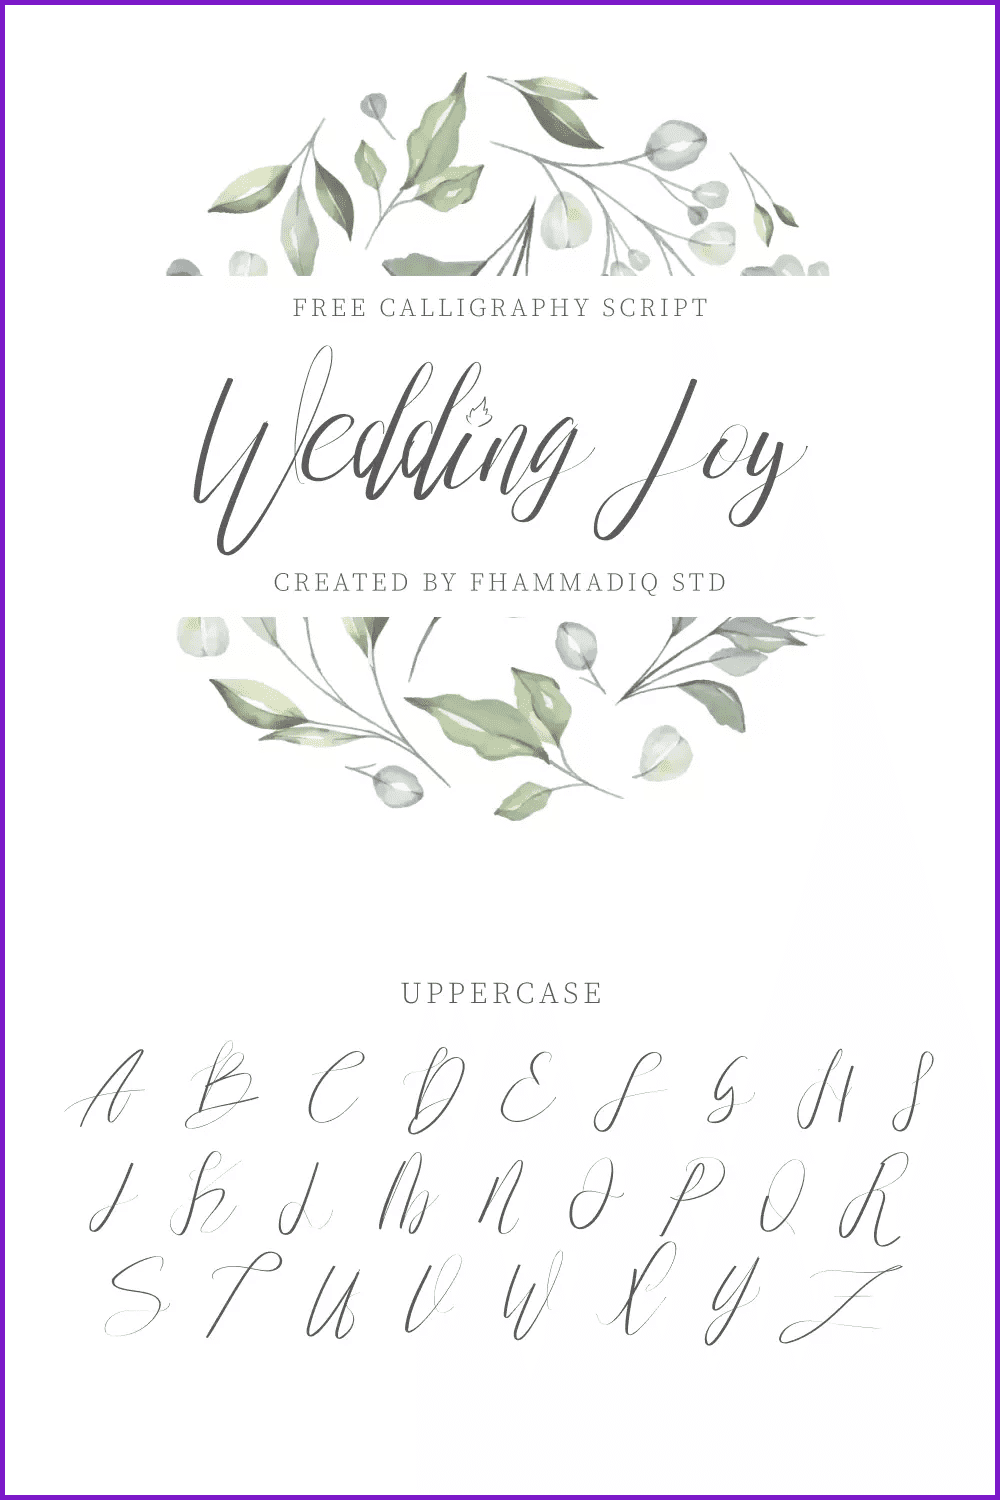 An example of a light, beautiful font set against a background of cute flowers.